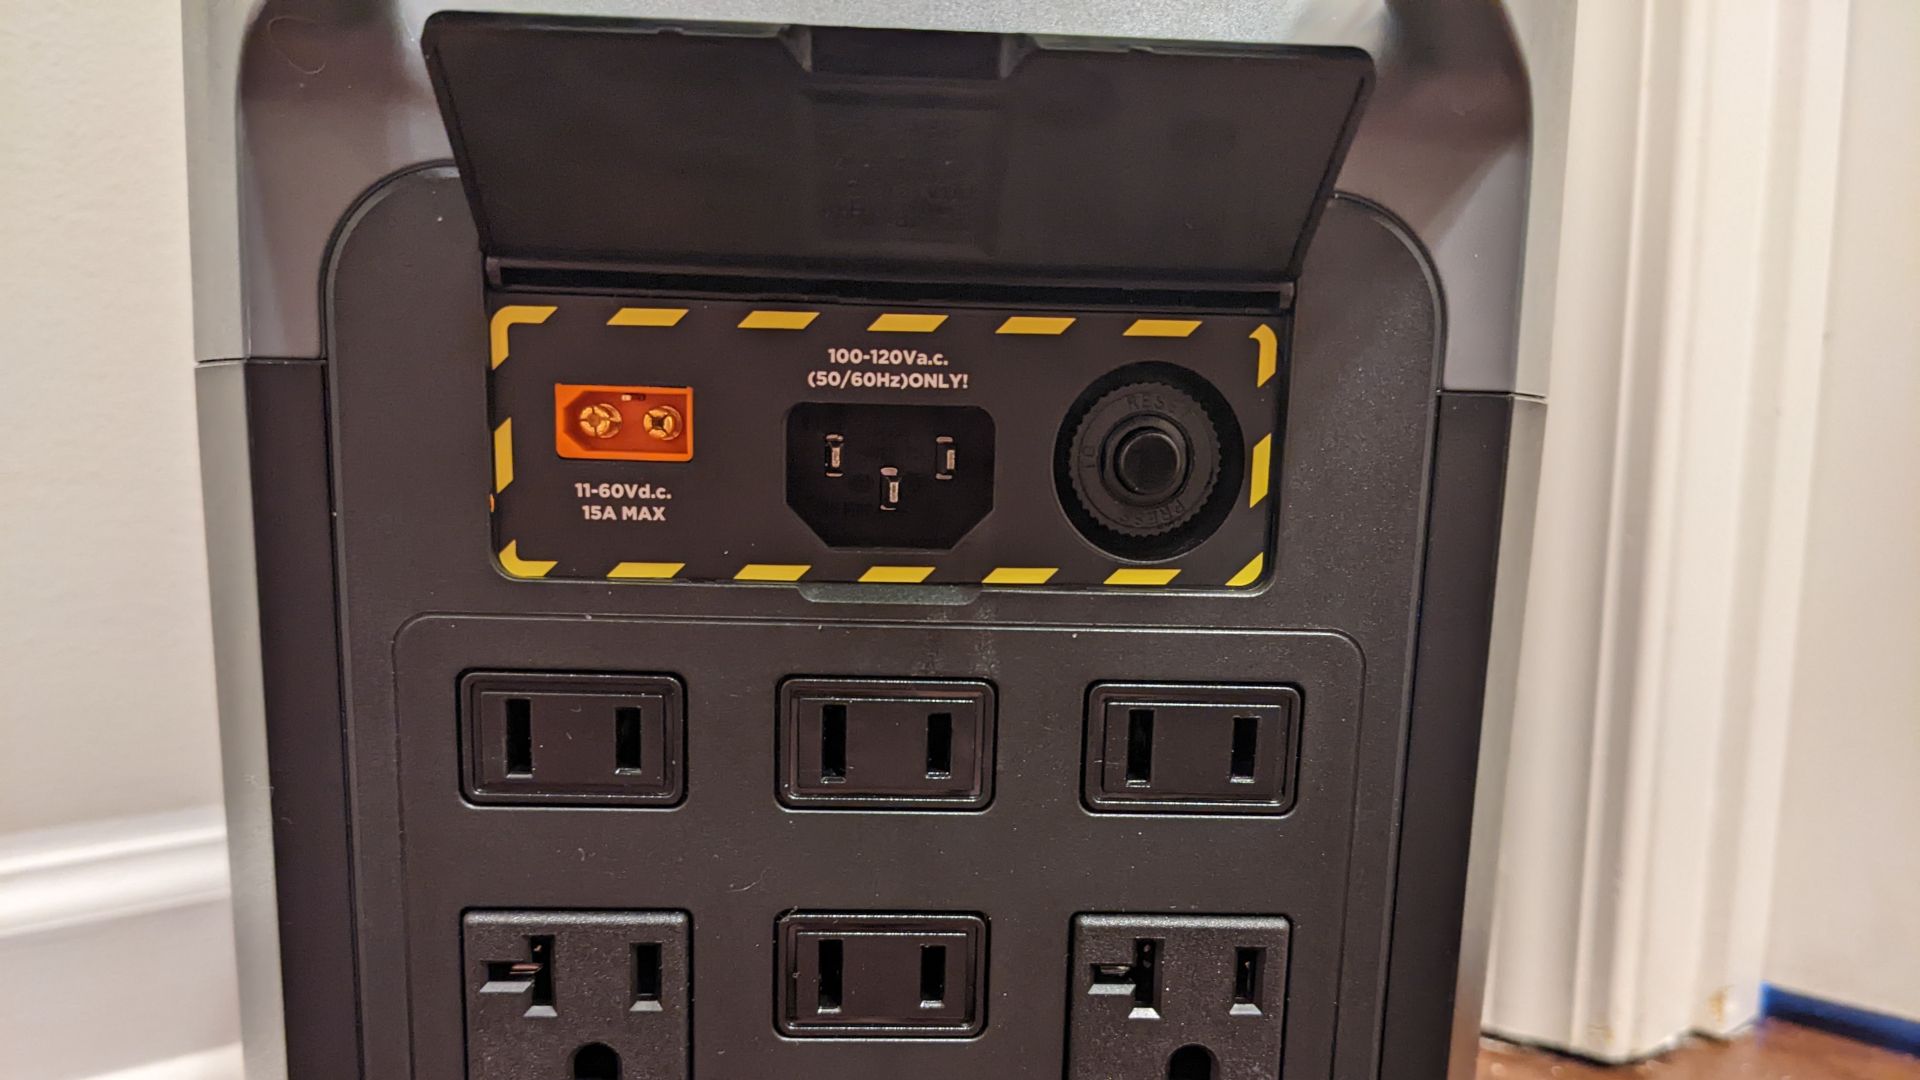 EcoFlow Delta 2 power station review: Power and ports aplenty - General  Discussion Discussions on AppleInsider Forums